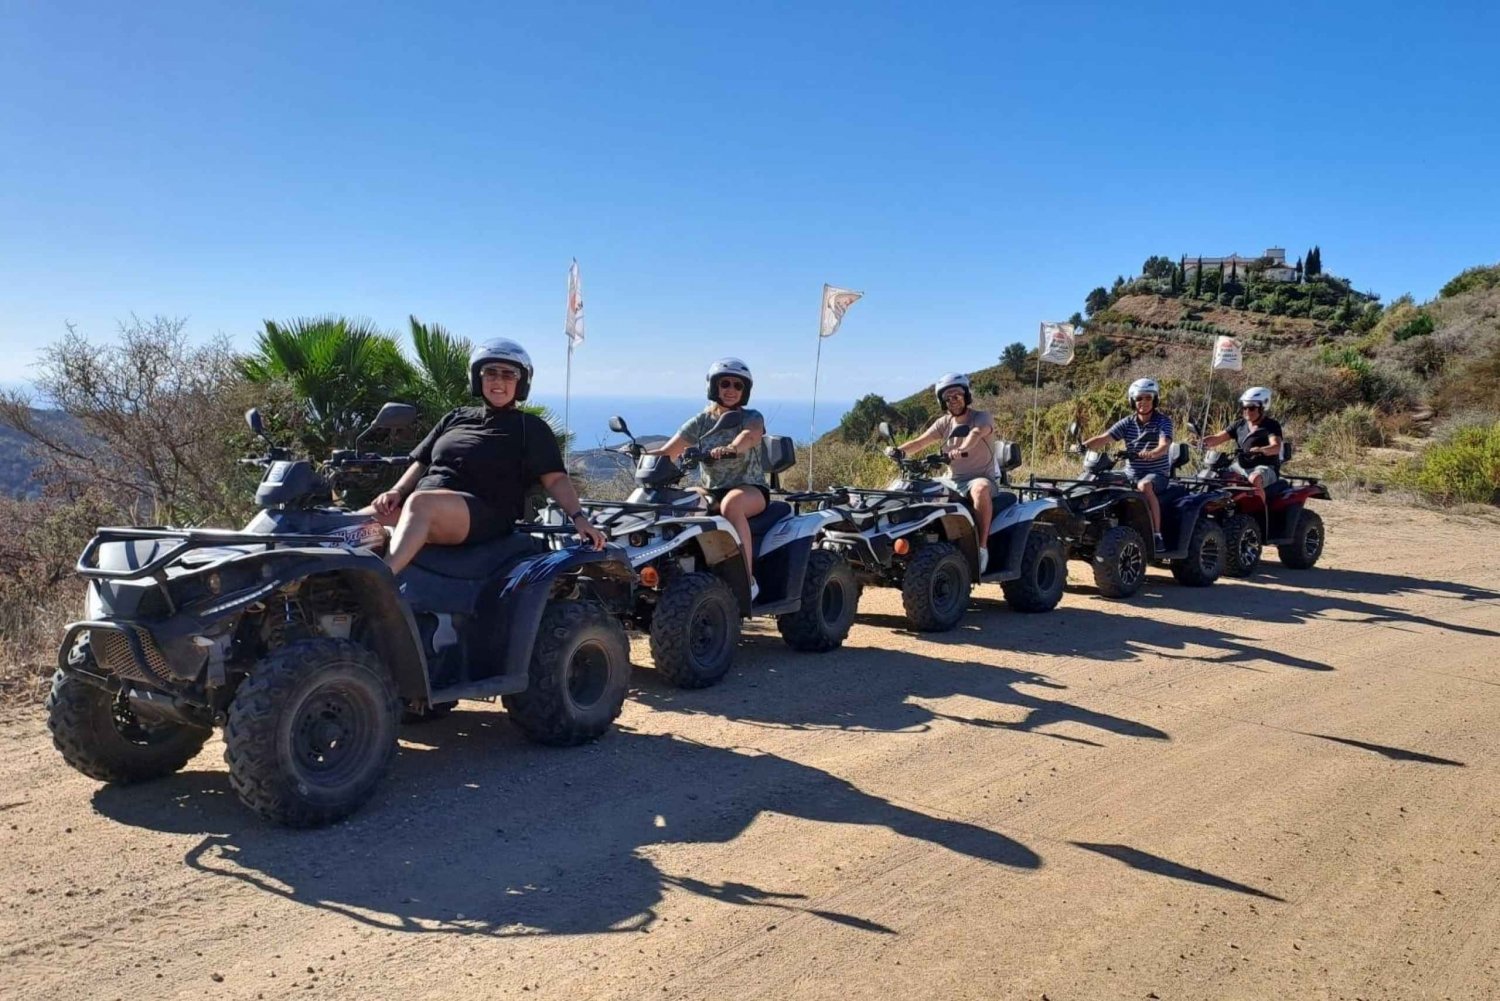 2 hours Quad Tour Marbella - From 170€ per group up 2 people